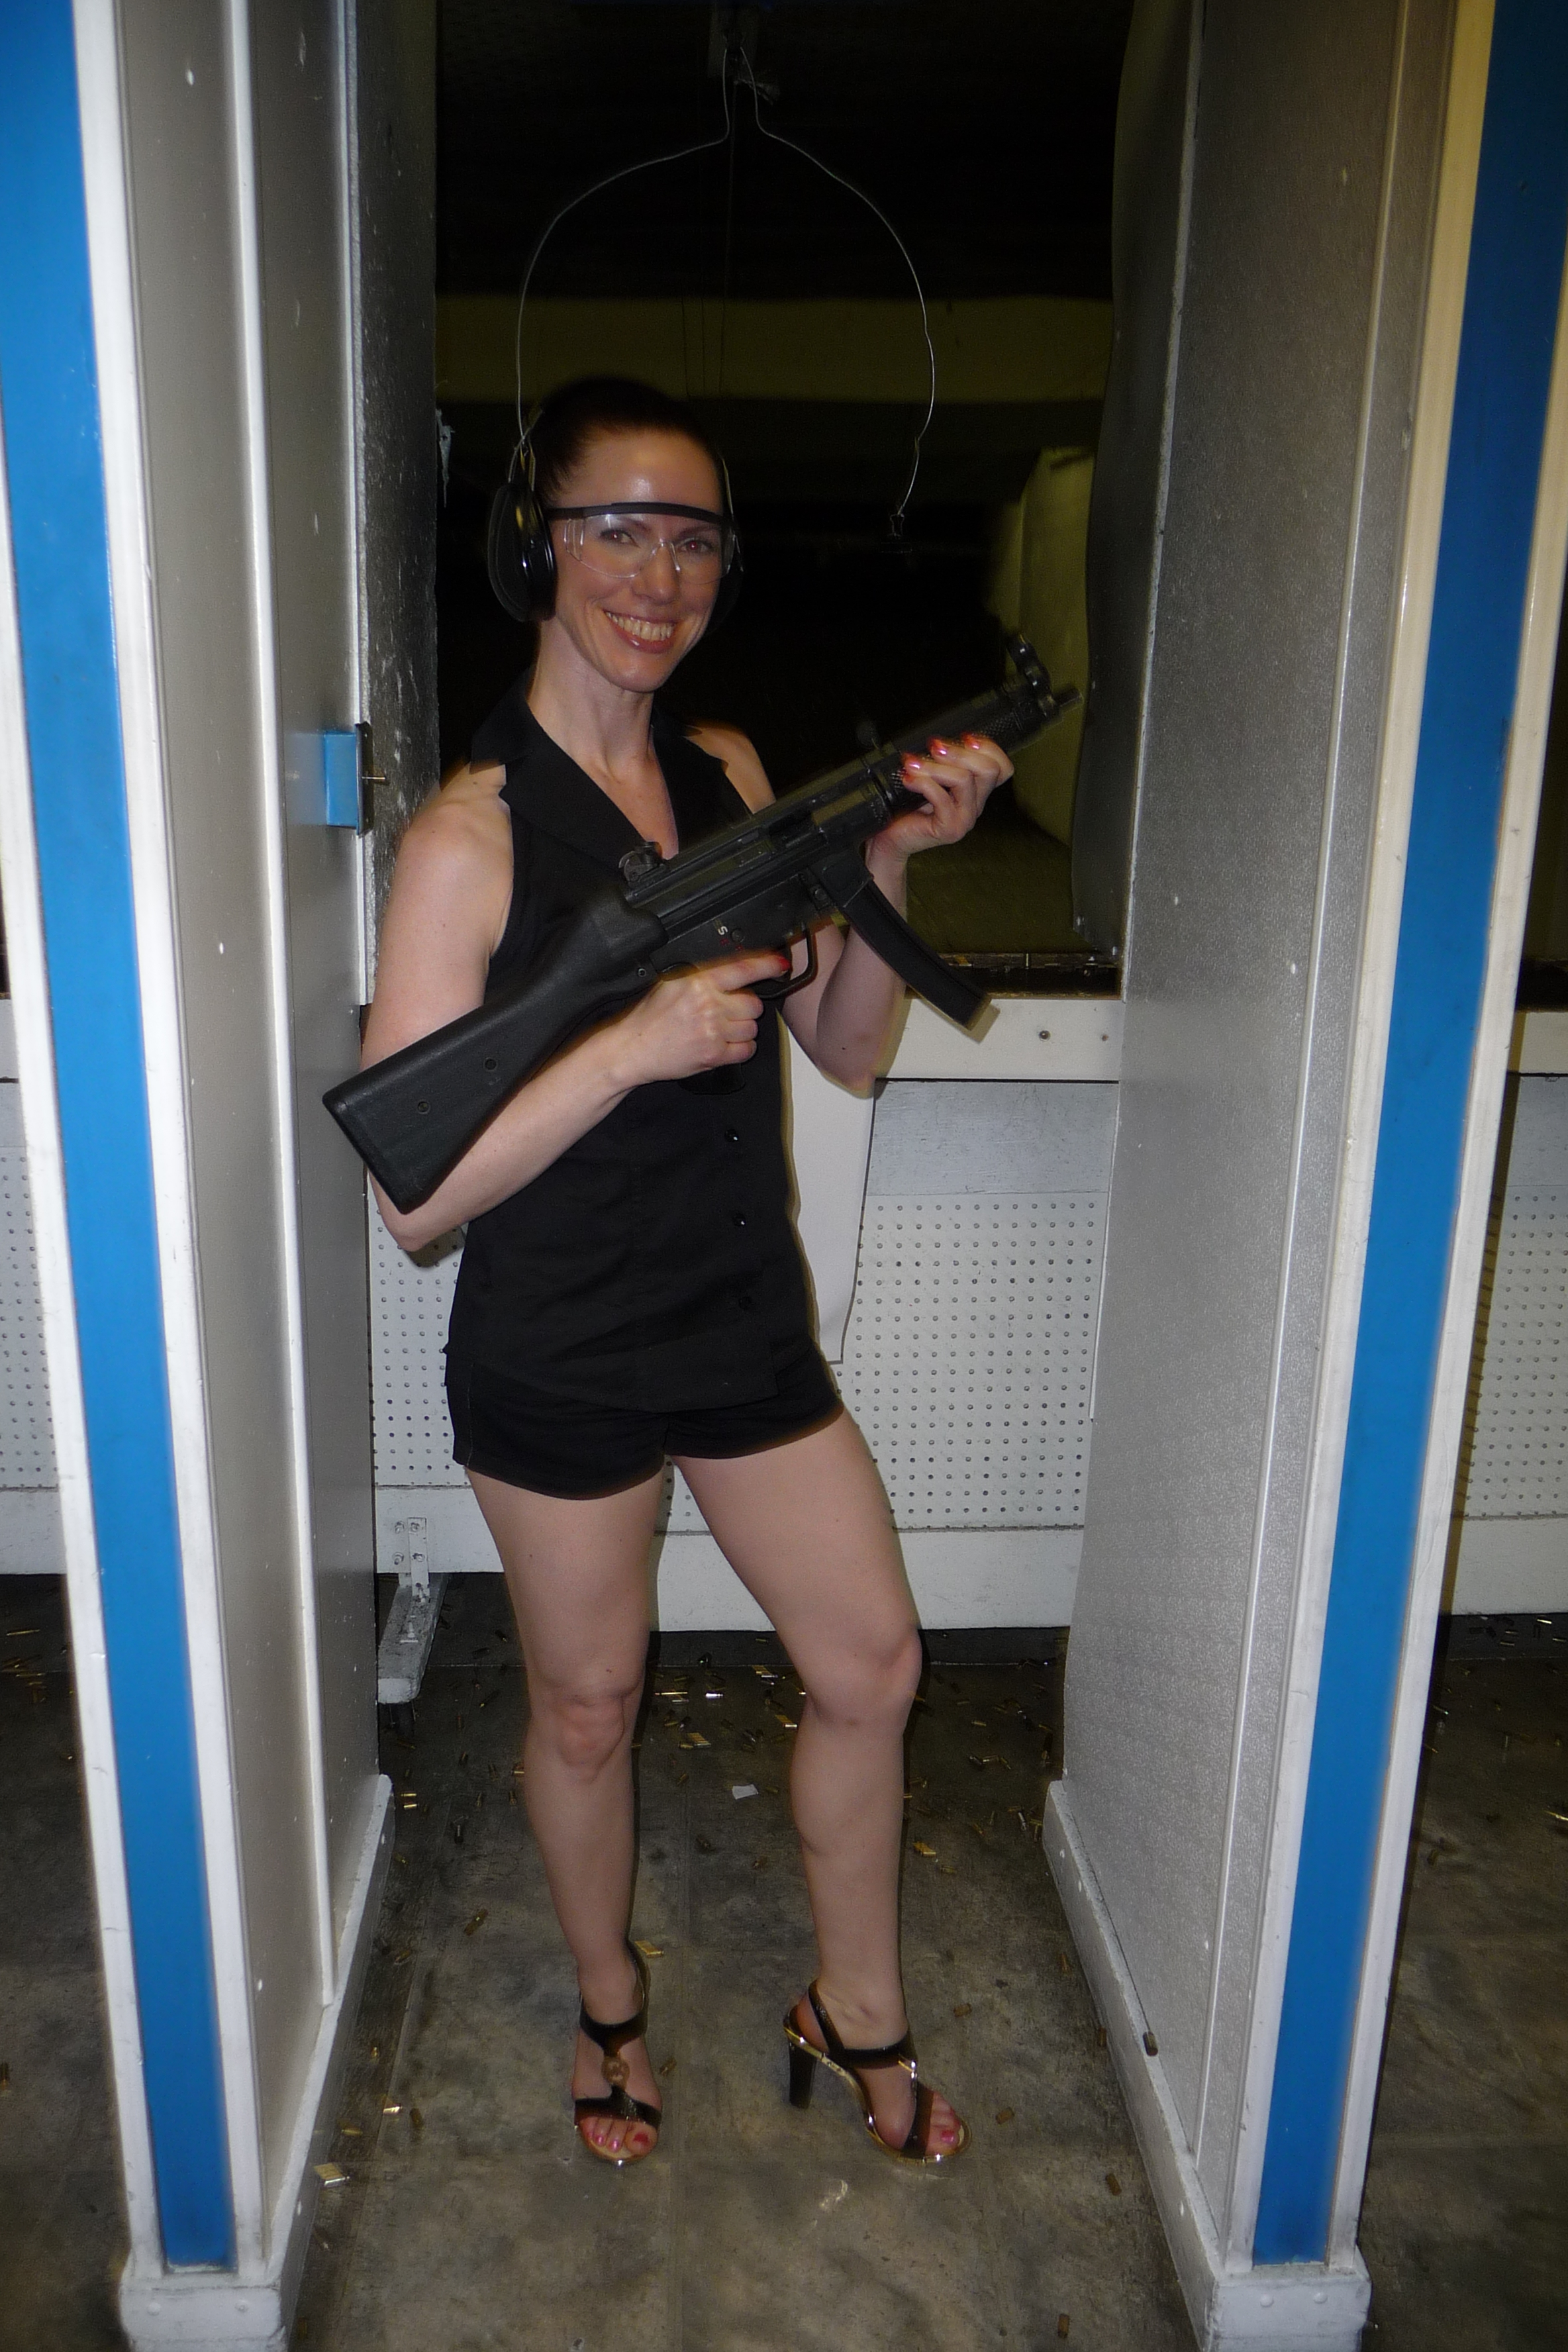 Rosemarie Griffin, Actress & Model at the firing range in Las Vegas, Nevada, March 2009